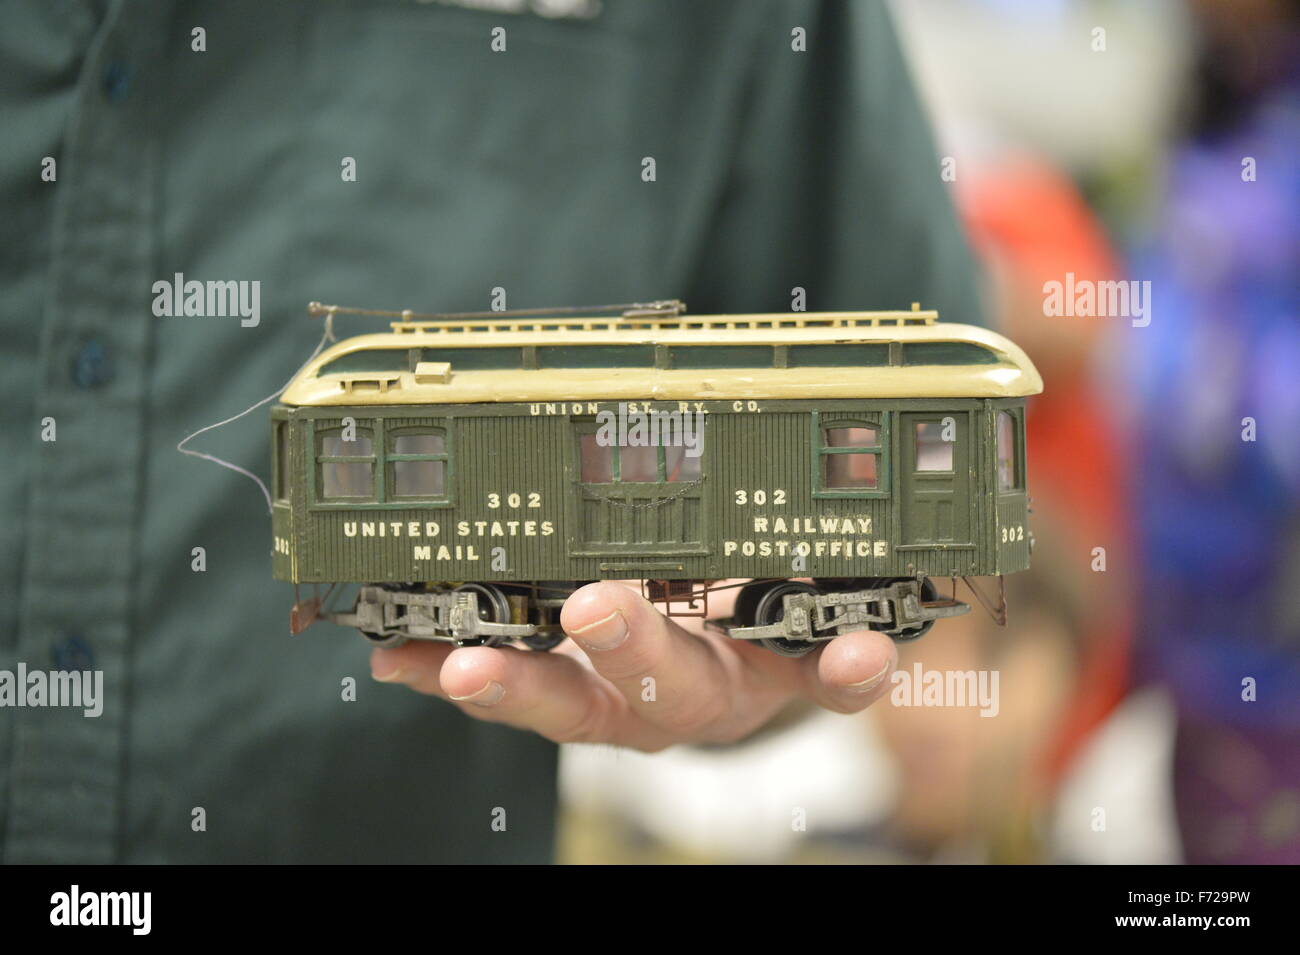 Bethpage, New York, USA. 22nd November 2015. FRANK KOBYLARZ, a co-founder of the Long Island Traction Society, holds a green Scratch Built 202 United States Mail Railway Post Office Trolley car. Kobylarz explained his O-Gauge trolley was not built from a kit but from basic materials such as wood, and that the original trolley it is modeled on operated from 1922-1937 in NY, NJ, New Haven, Bronx, Brooklyn. The trolley trains layout is one of several operating layouts at the 6th Annual Nassau County Model Train Show, held at the Bethpage Senior Community Center. Stock Photo